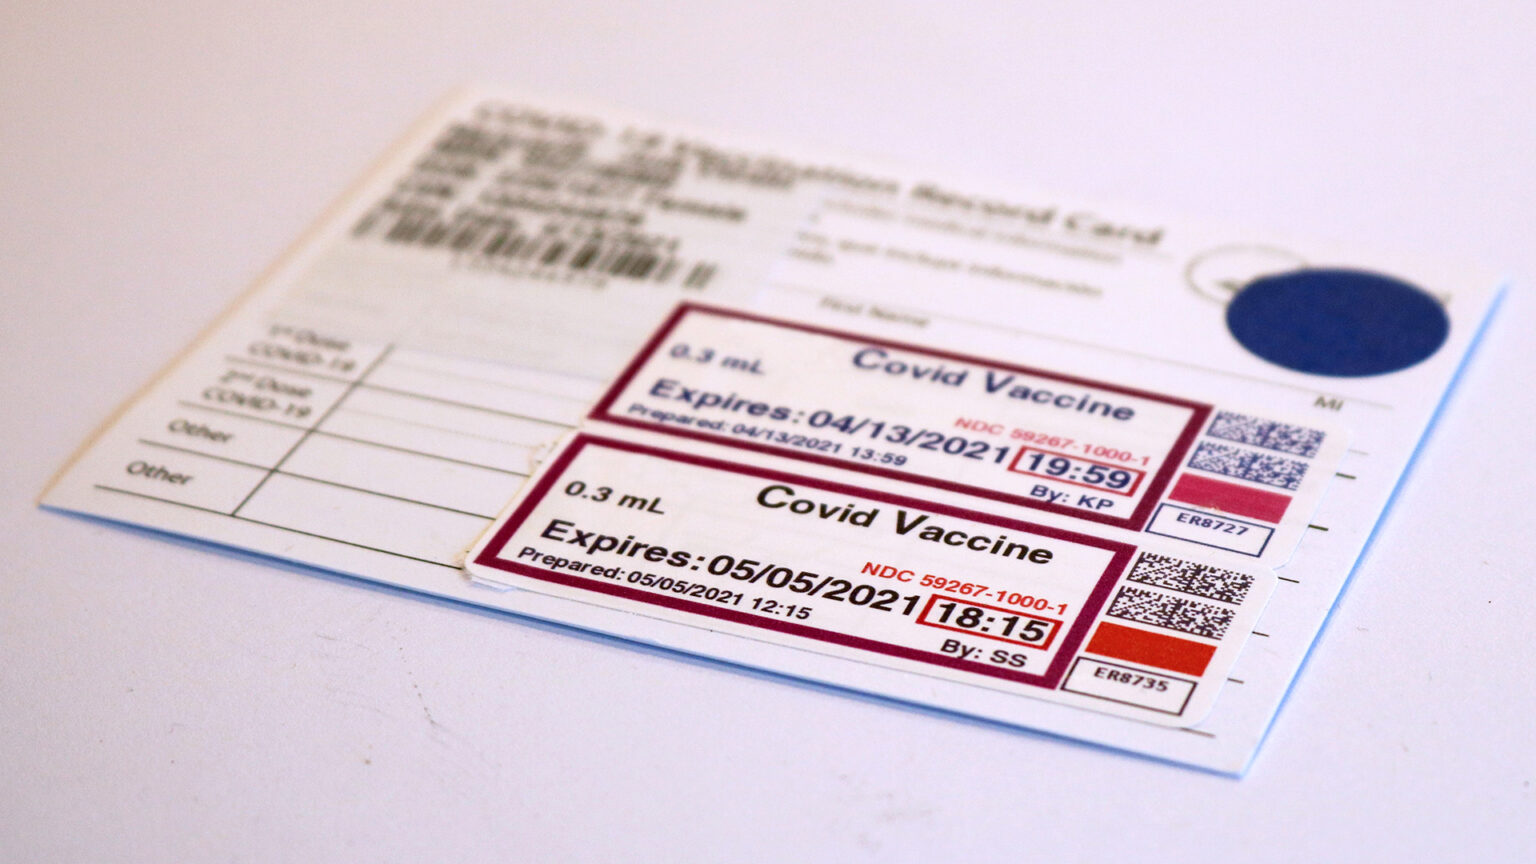 A COVID-19 vaccination record card with stickers noting two doses sits on a white surface.